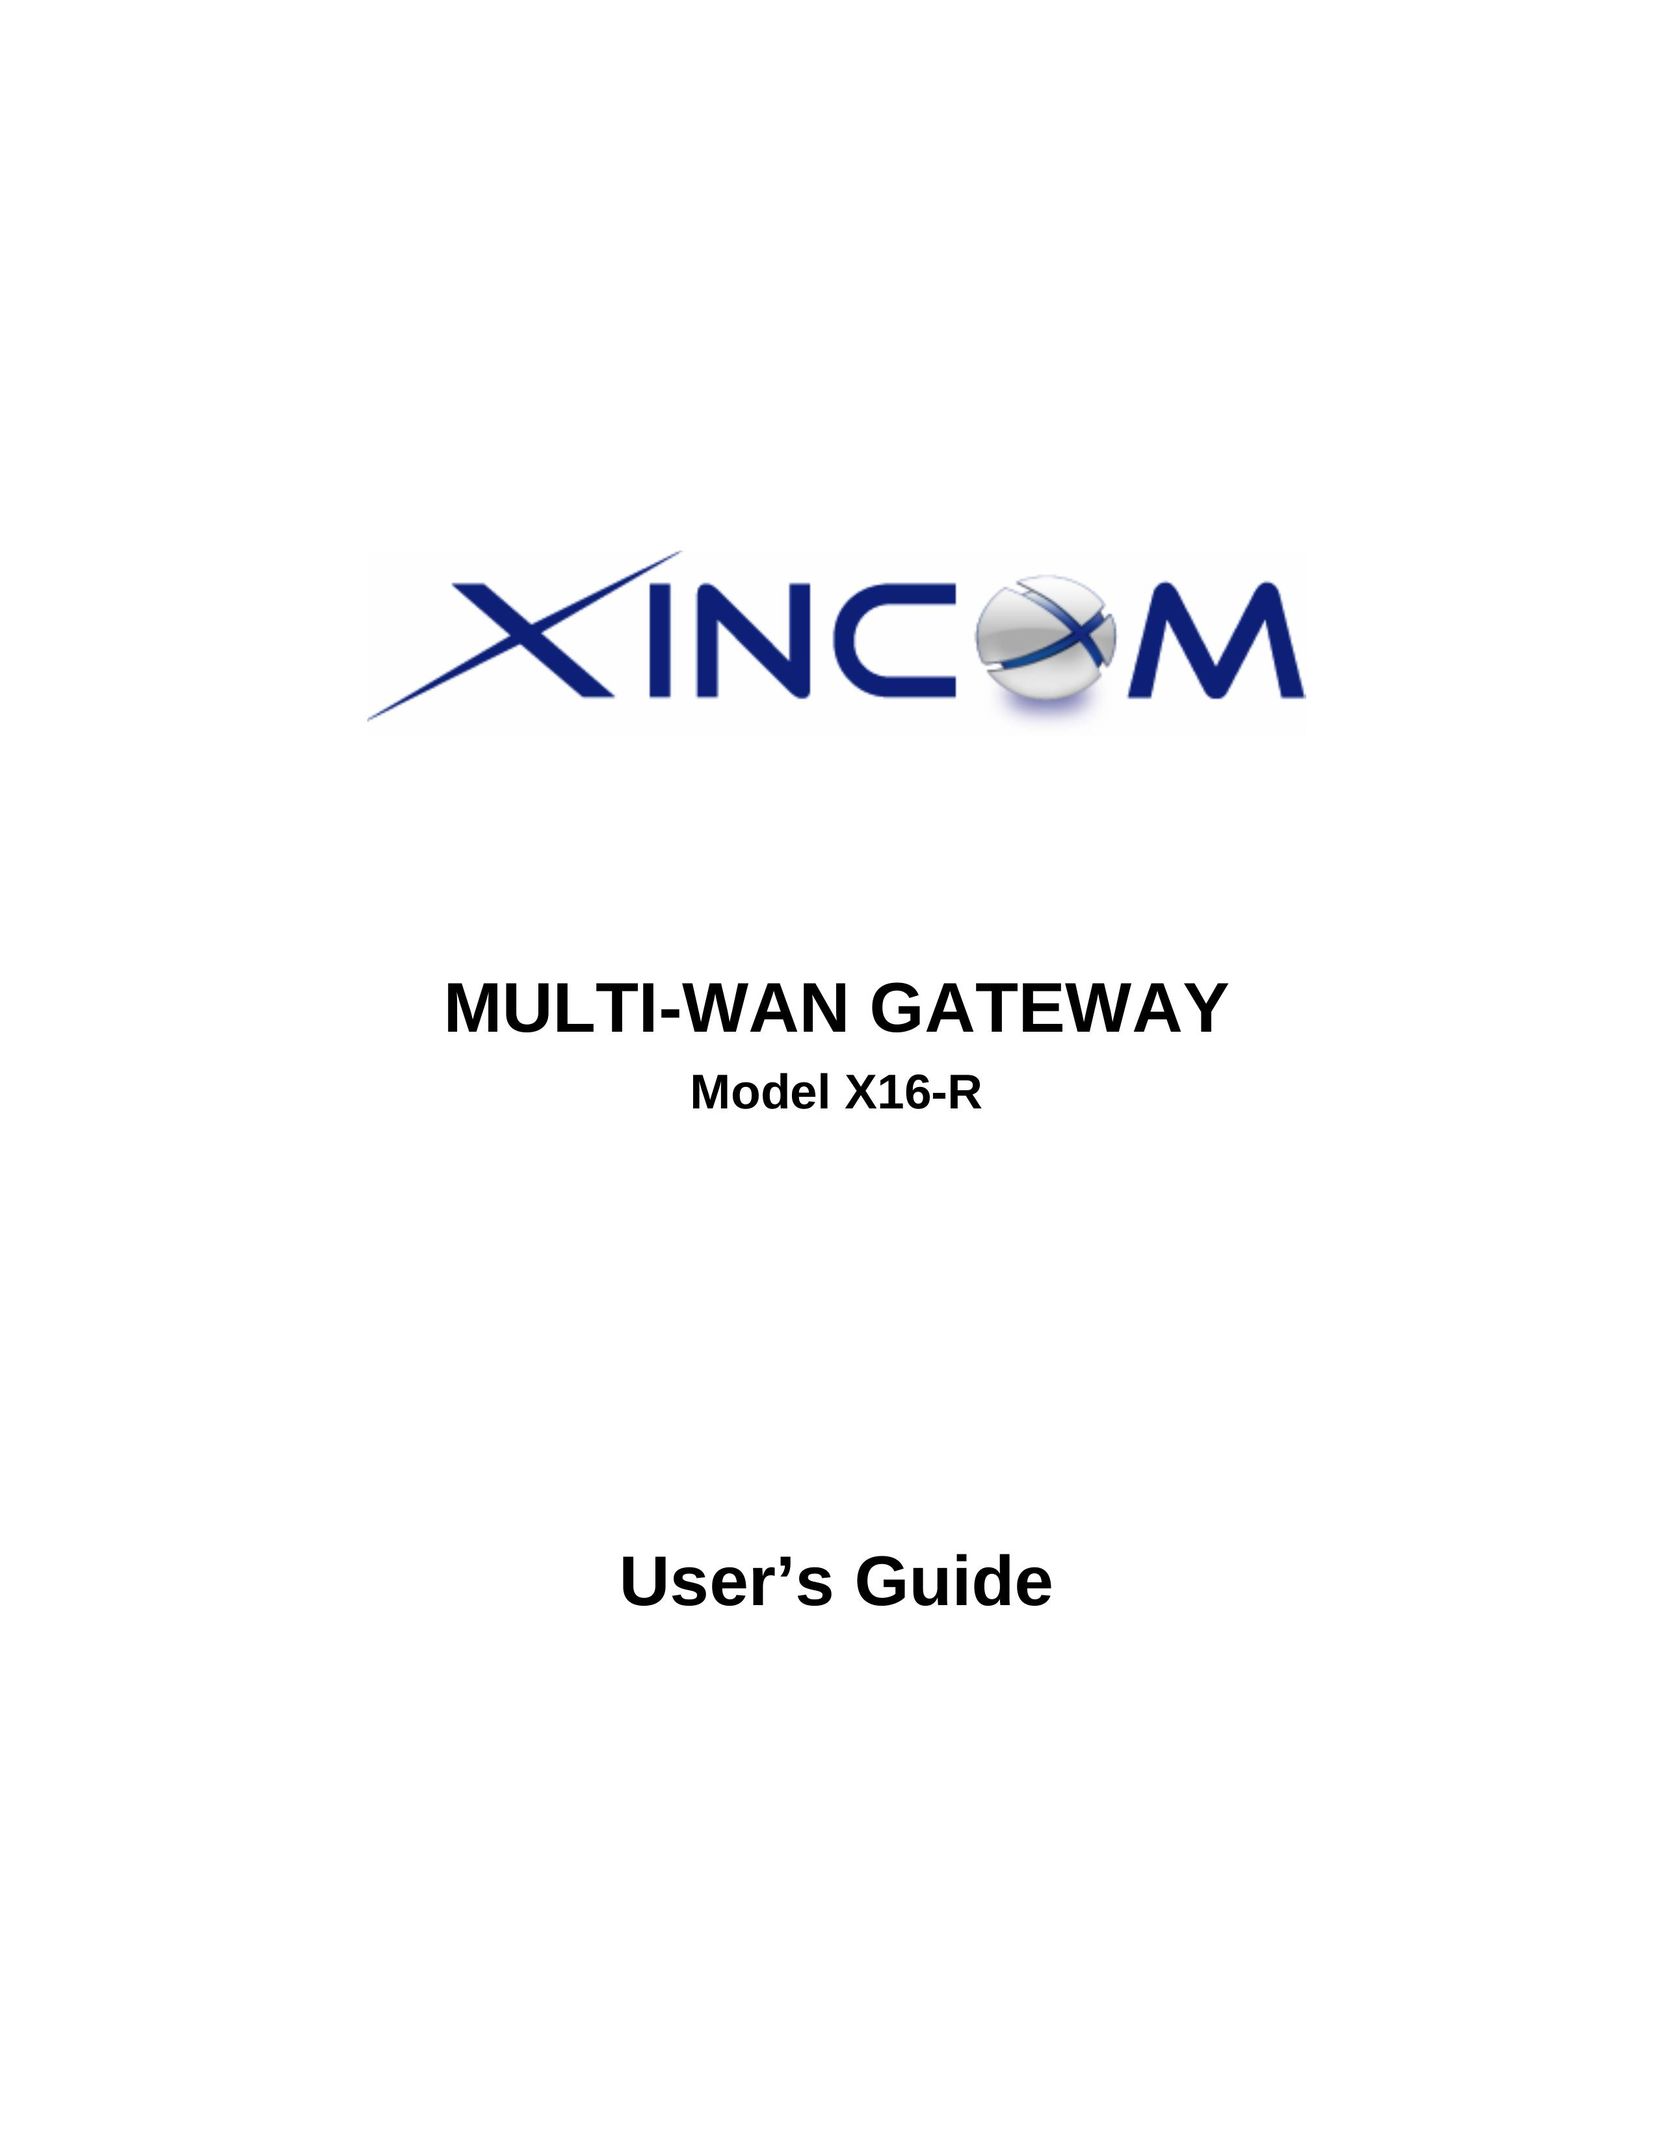 XiNCOM X16-R Network Router User Manual